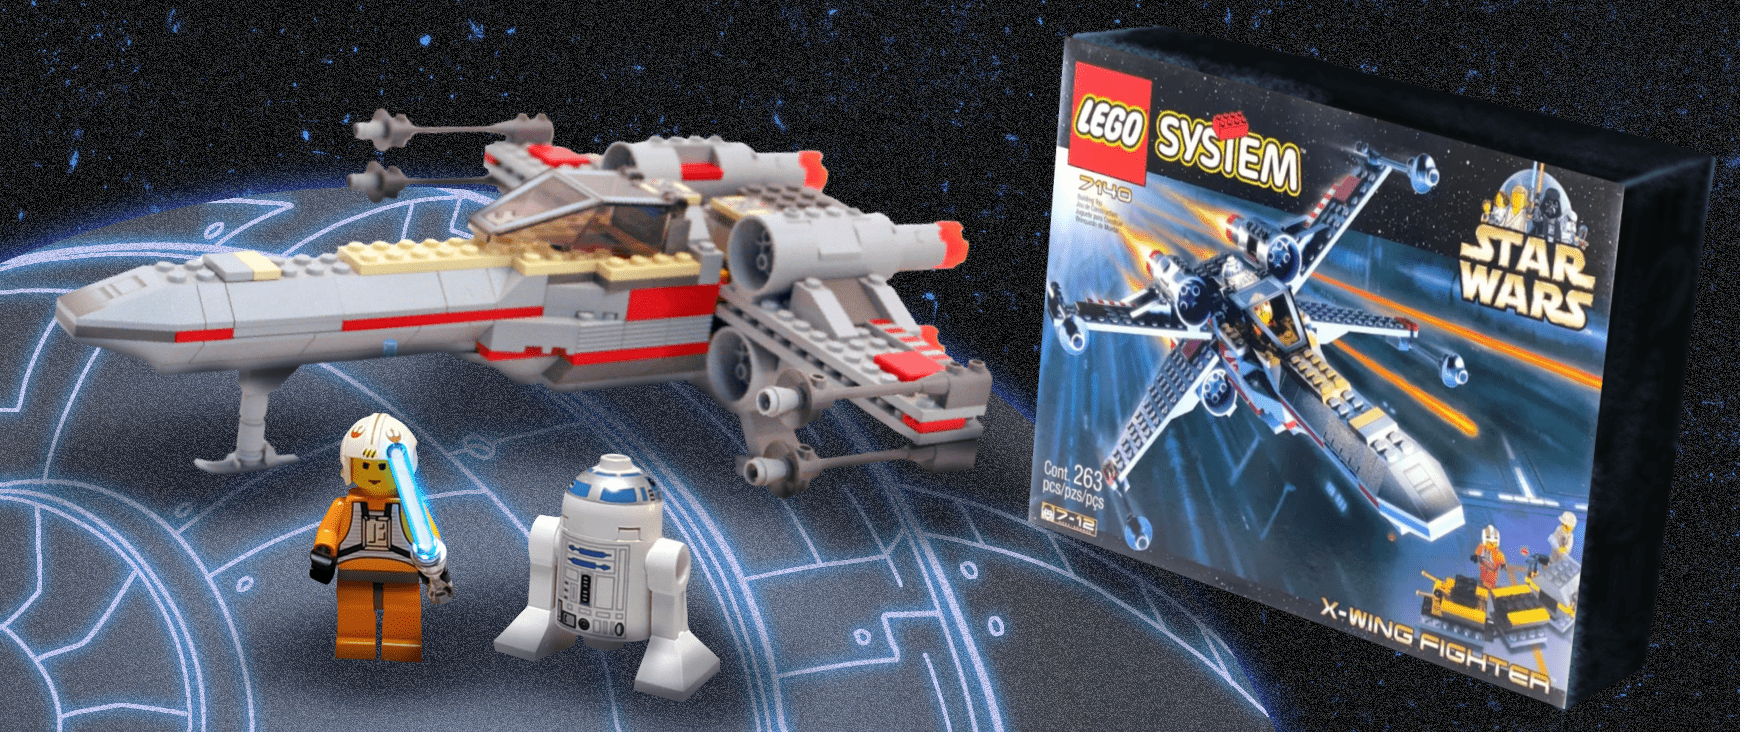 Lego Star Wars X-Wing Fighter 1999